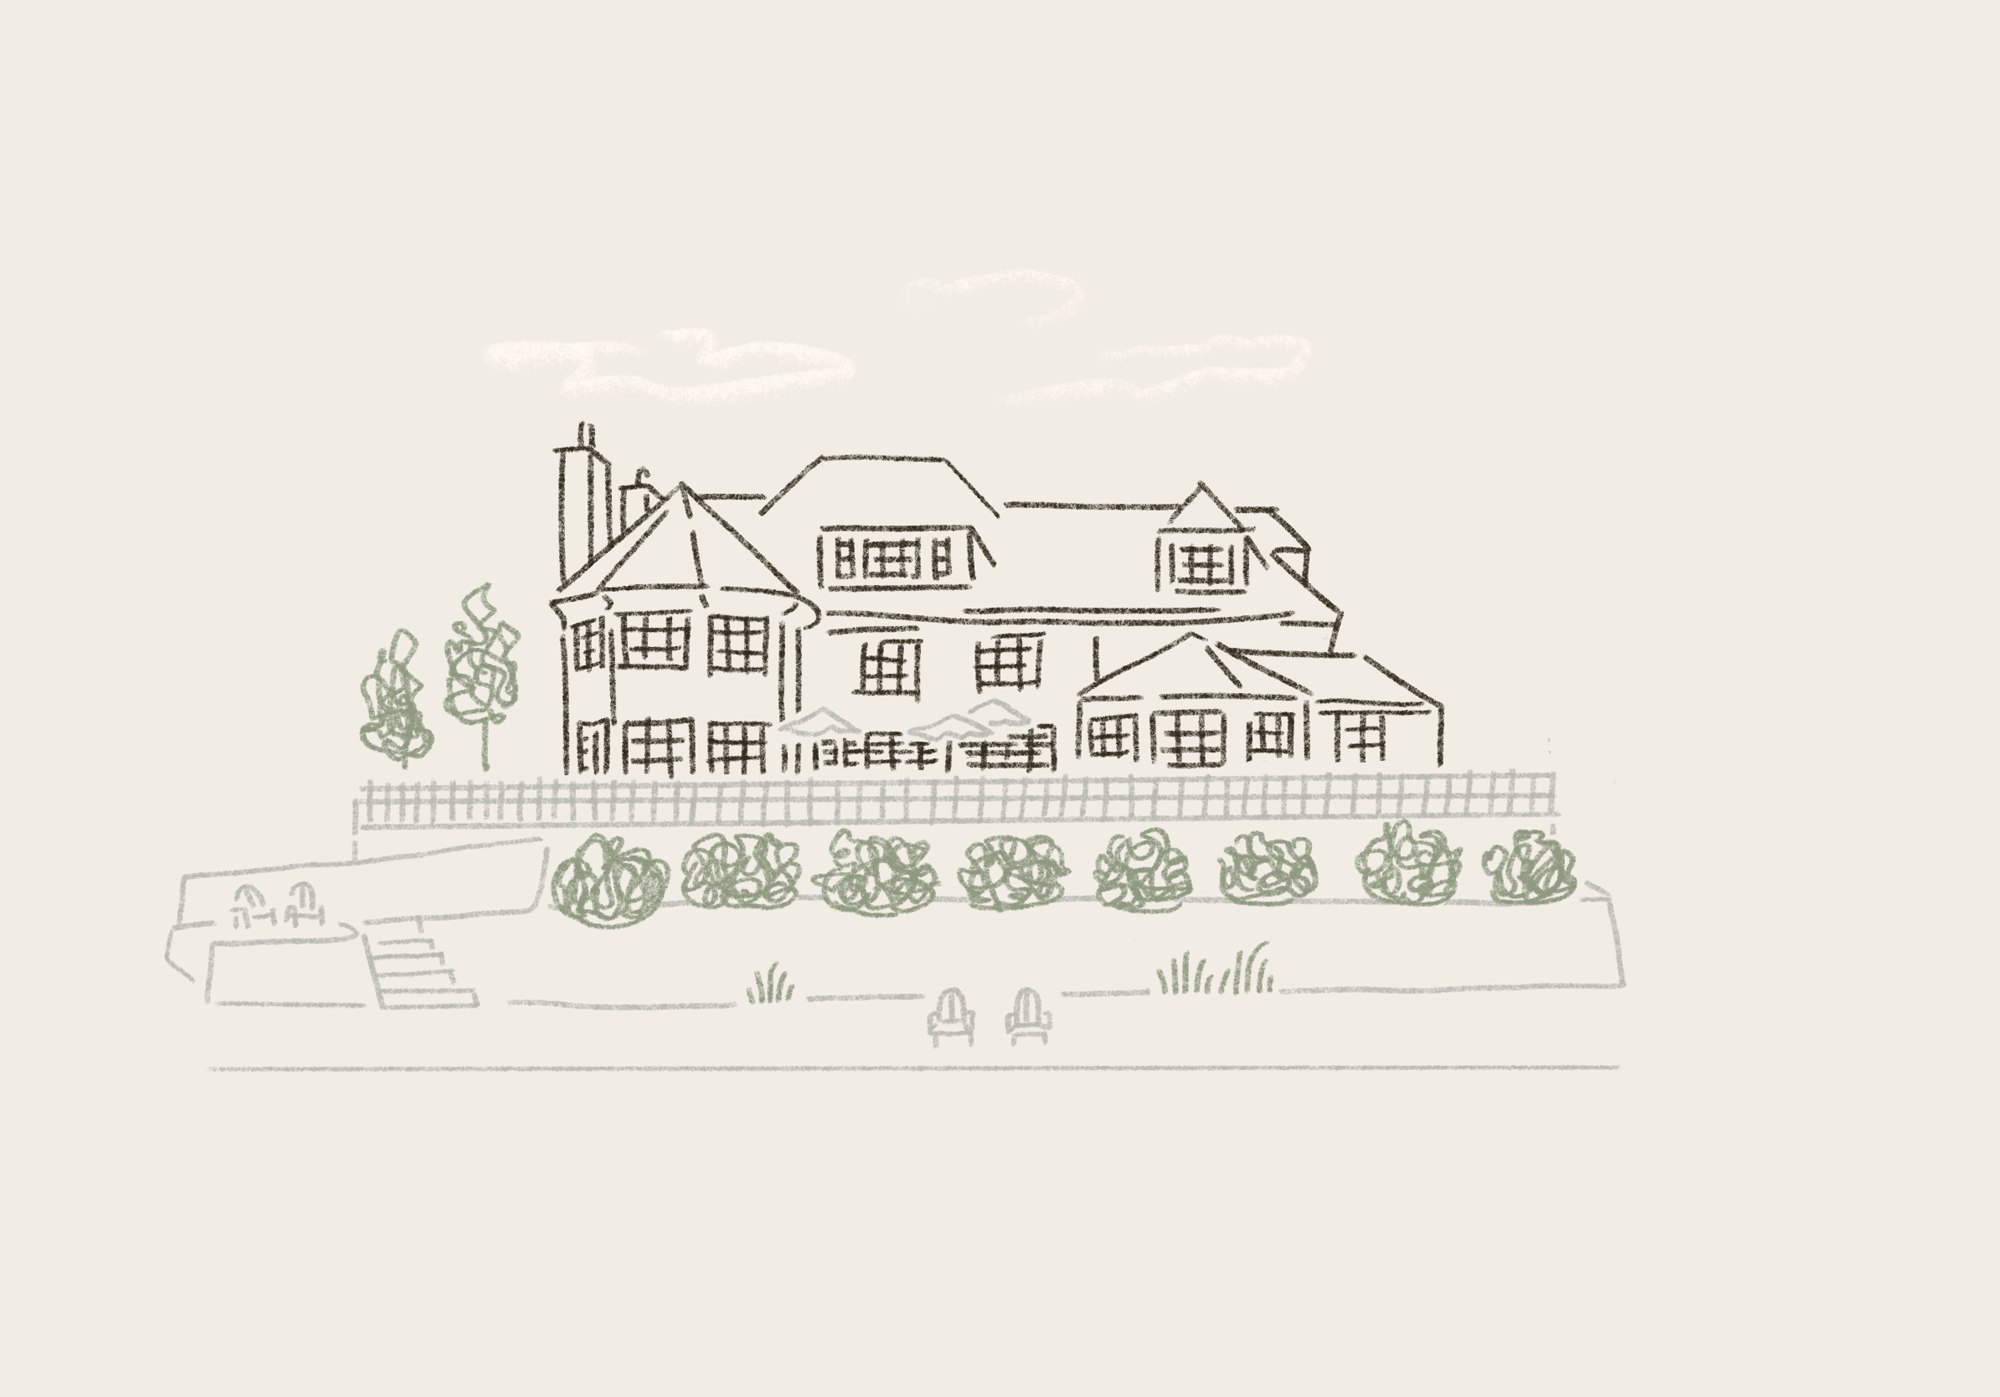 Logo, stationery, website and illustration by Perky Bros for New Jersey property developer Tembo